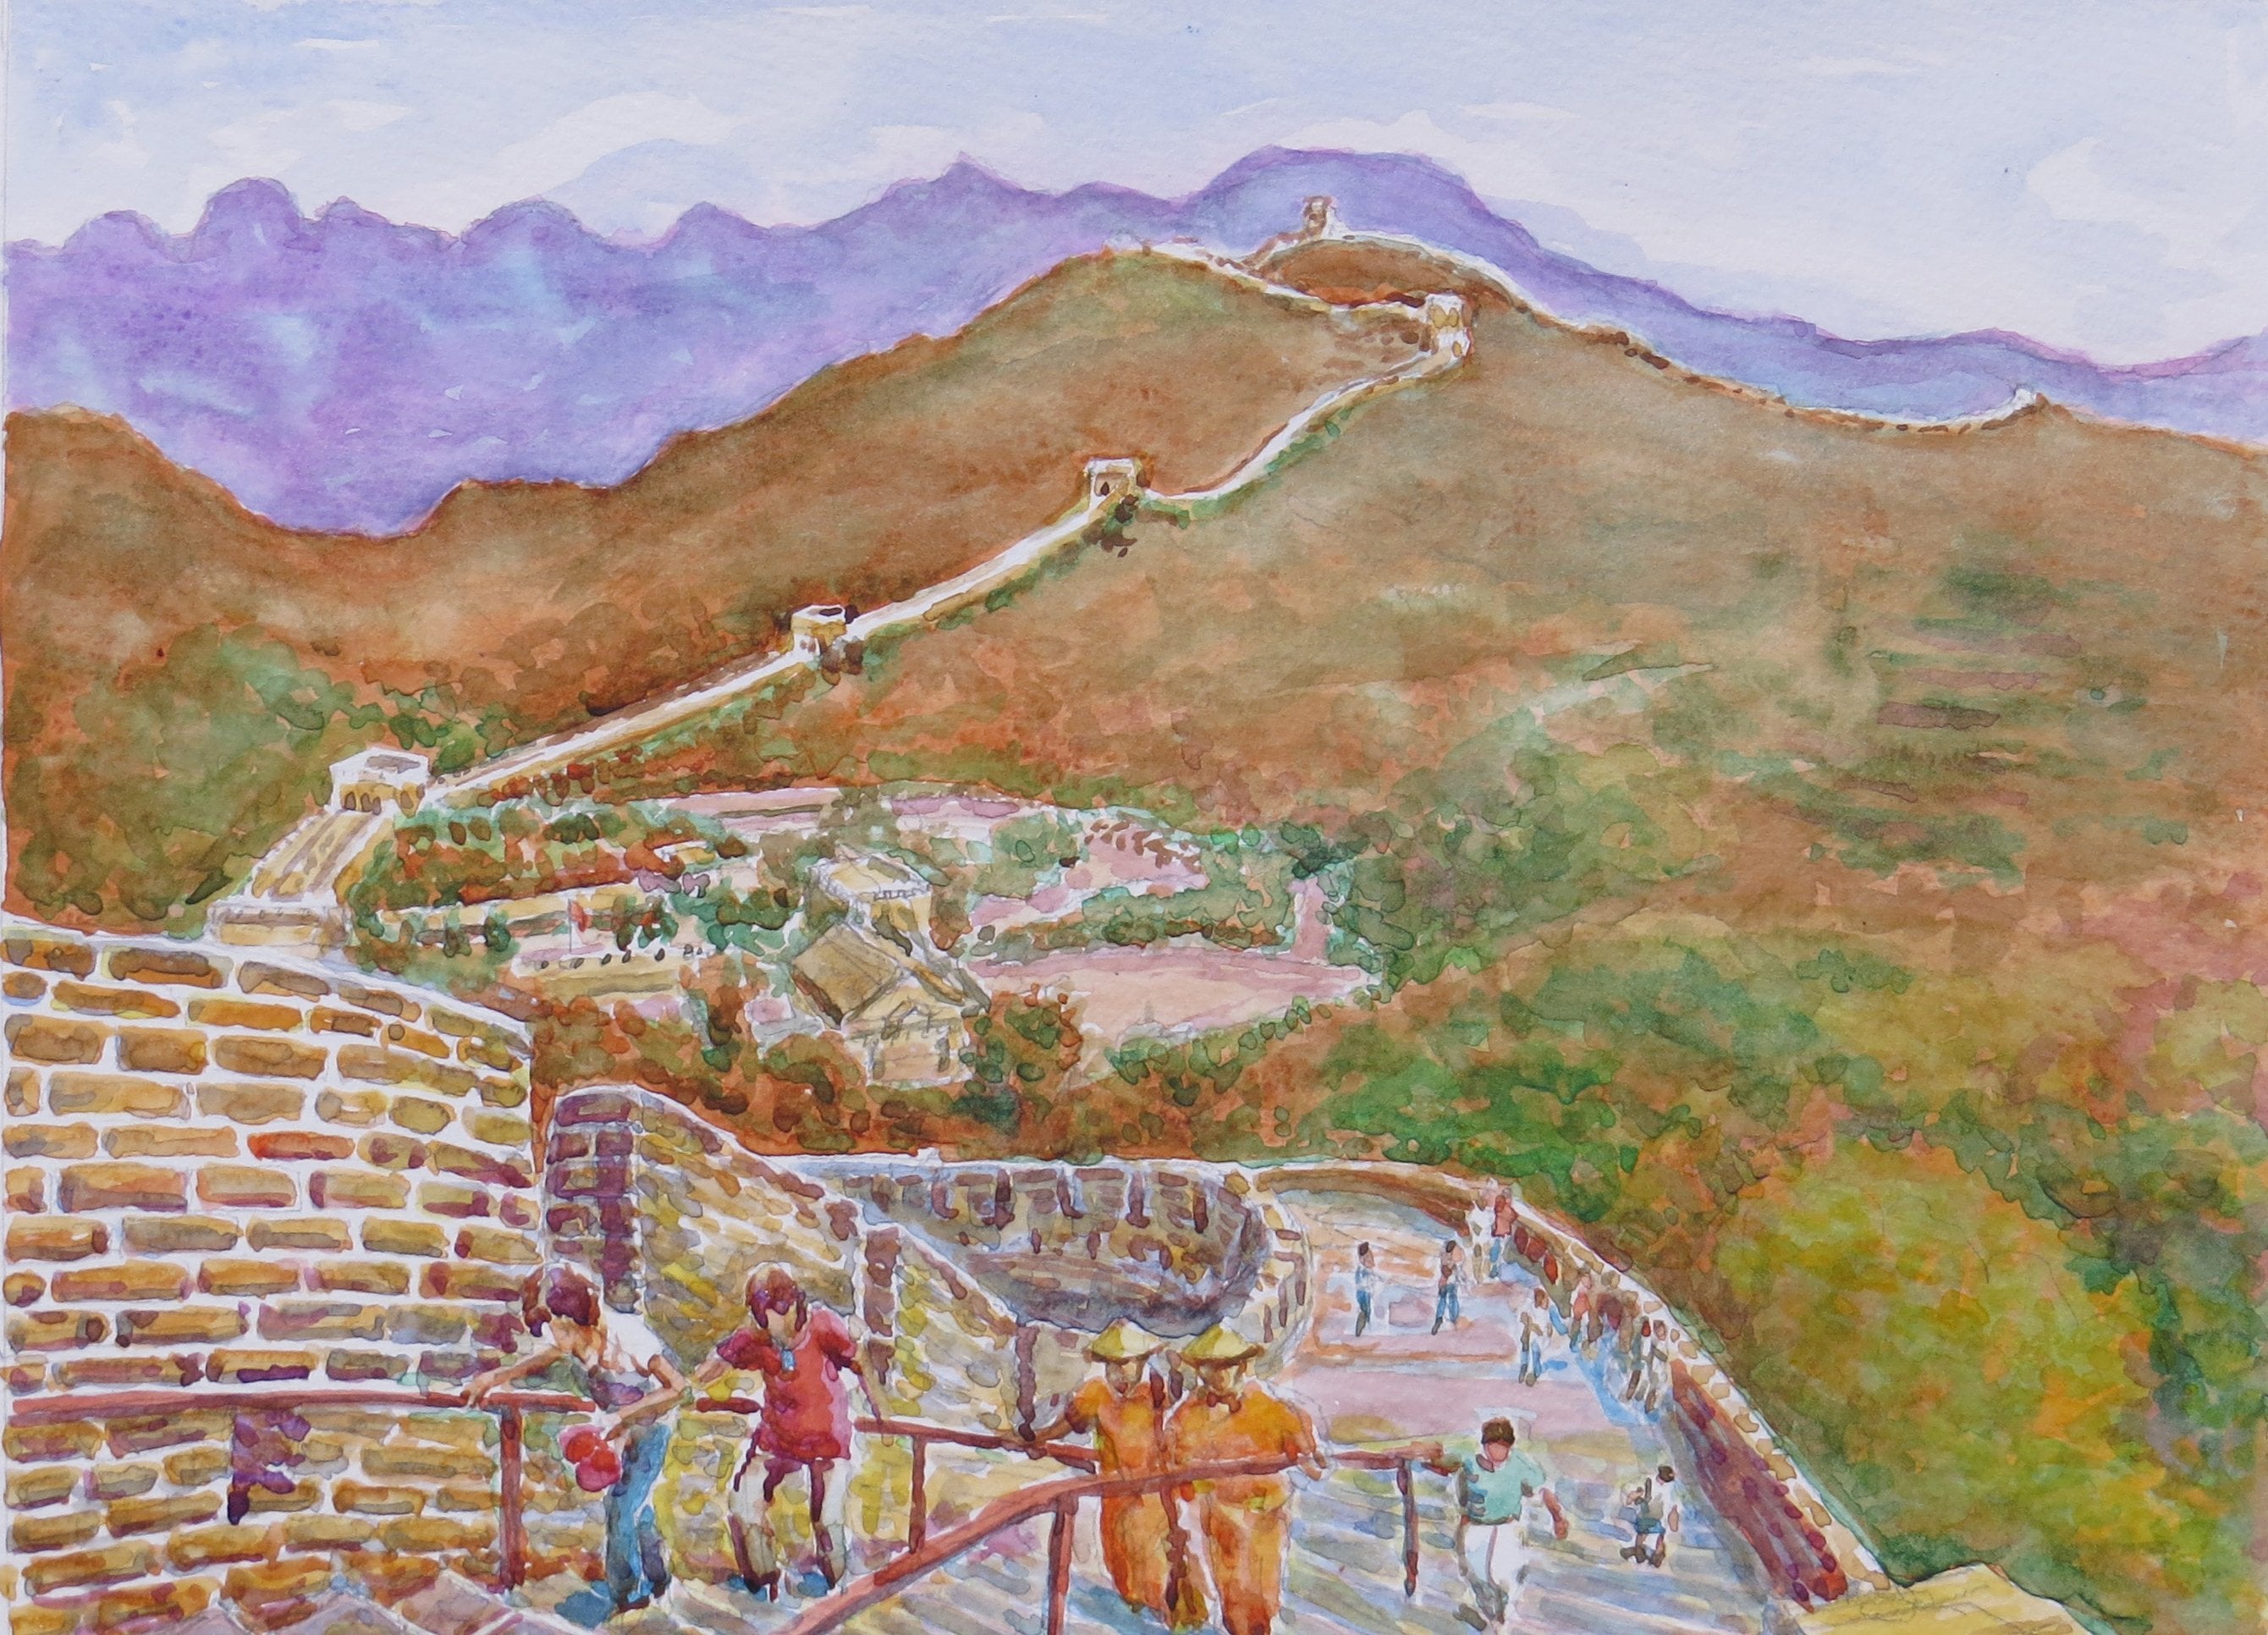 Great wall of China, watercolour, 40 x 30cm